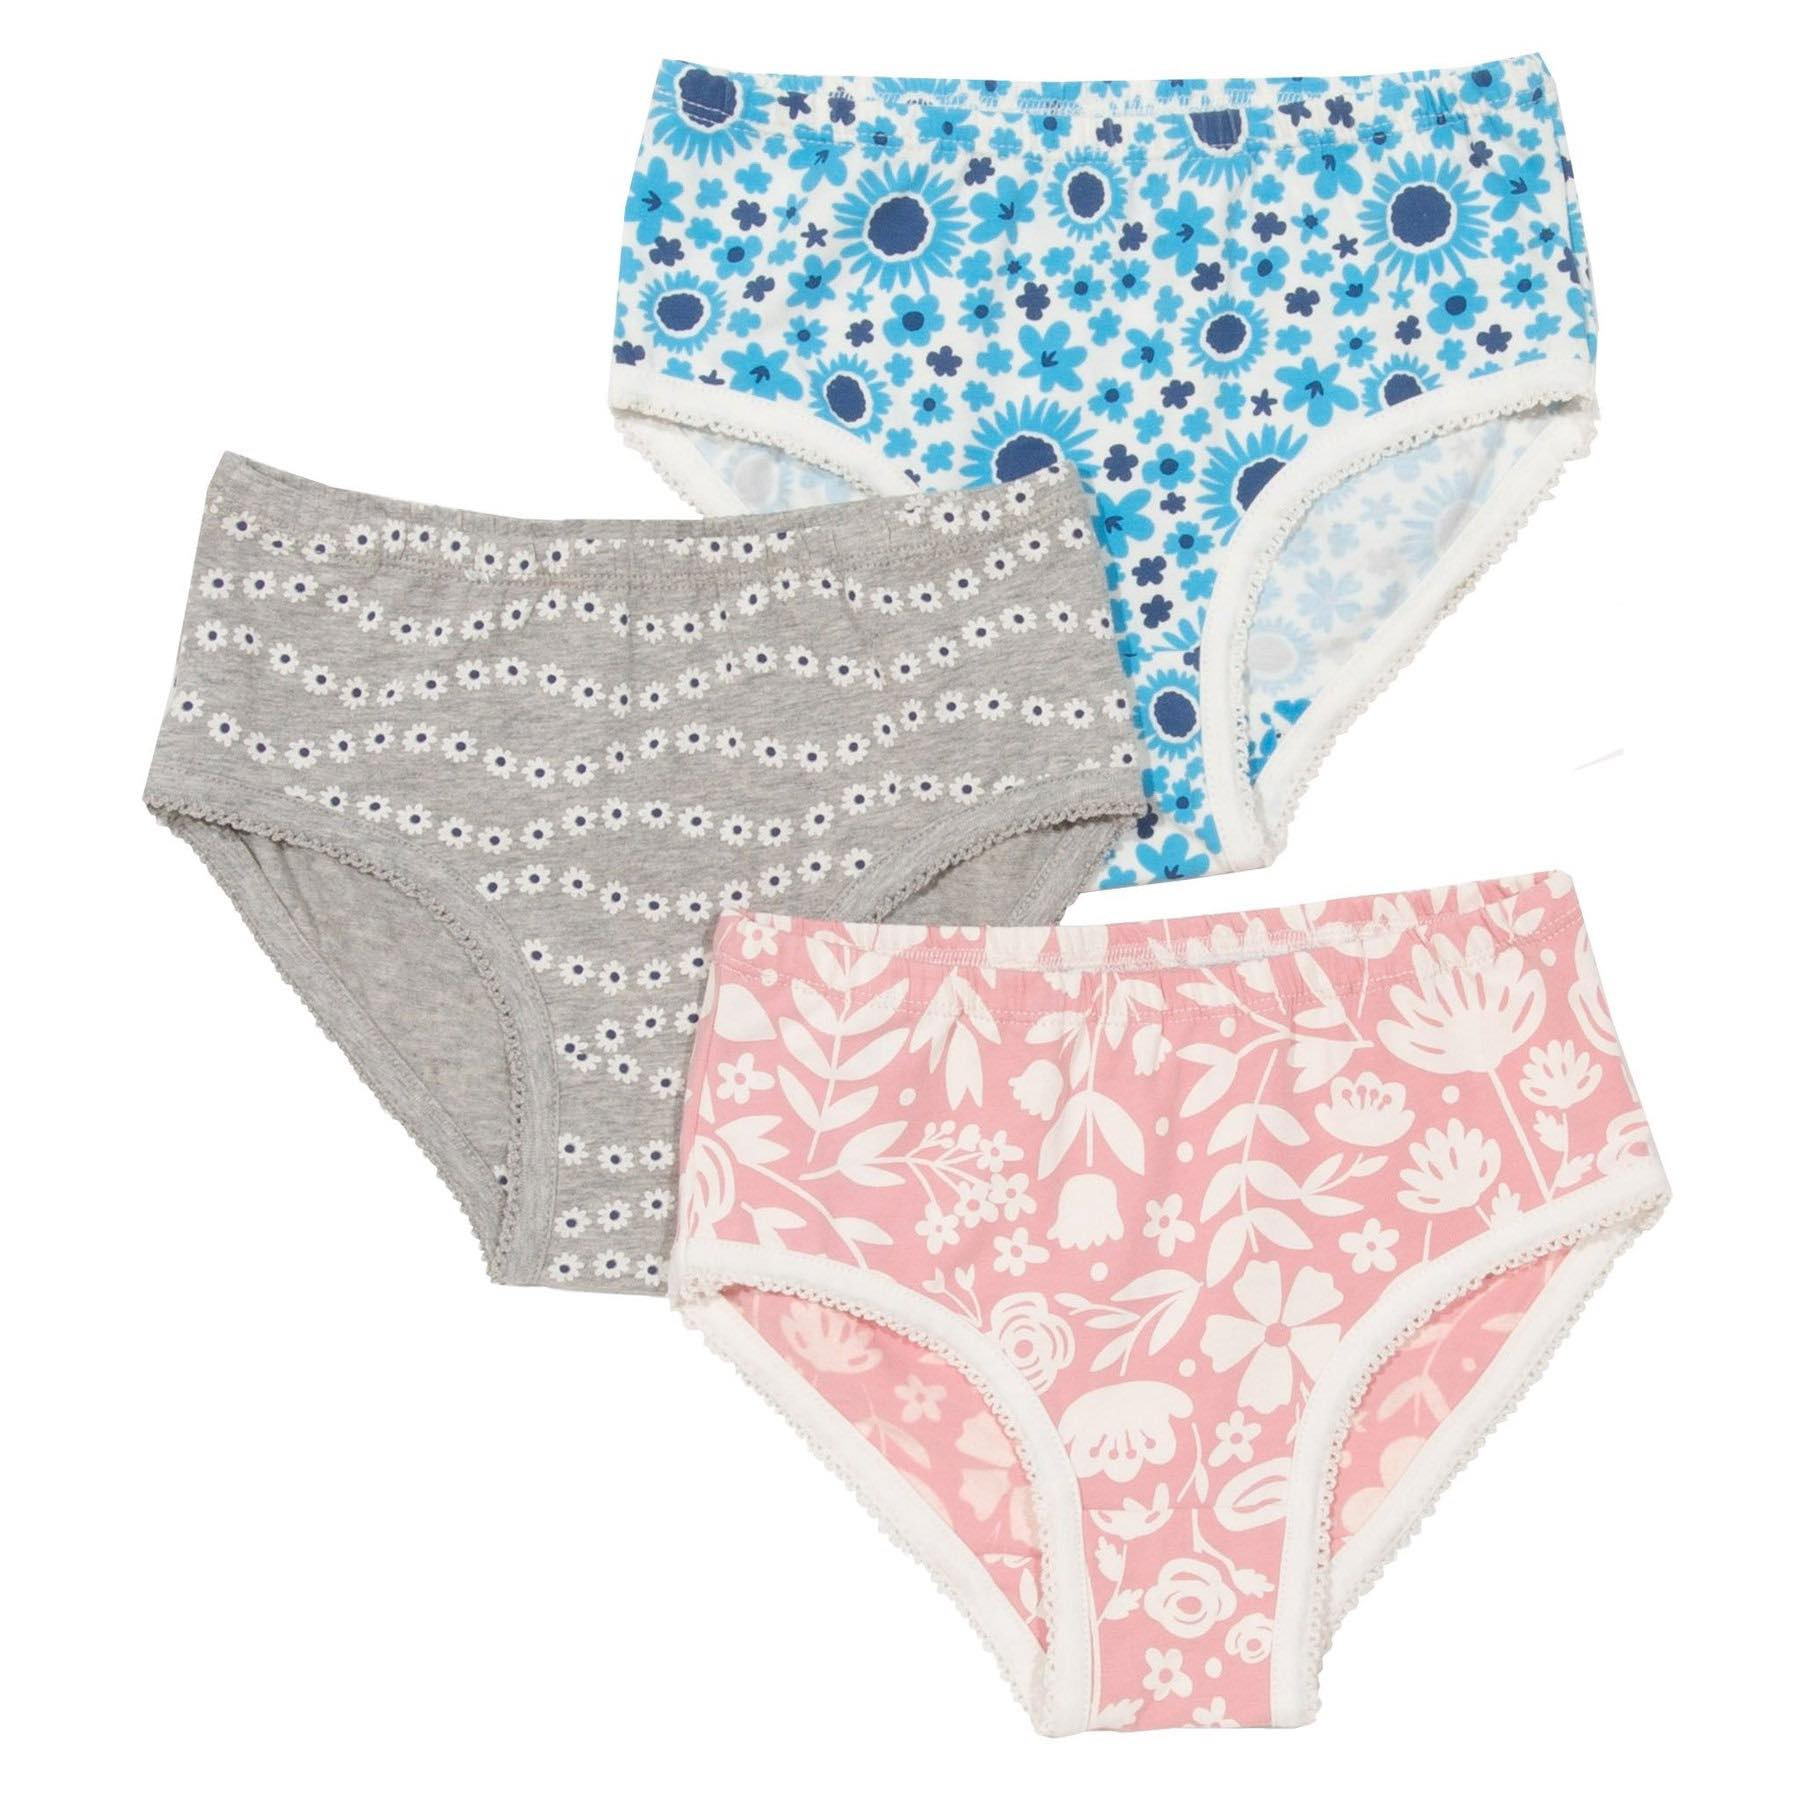 Pretty petal briefs in organic cotton by Kite – 3 pack